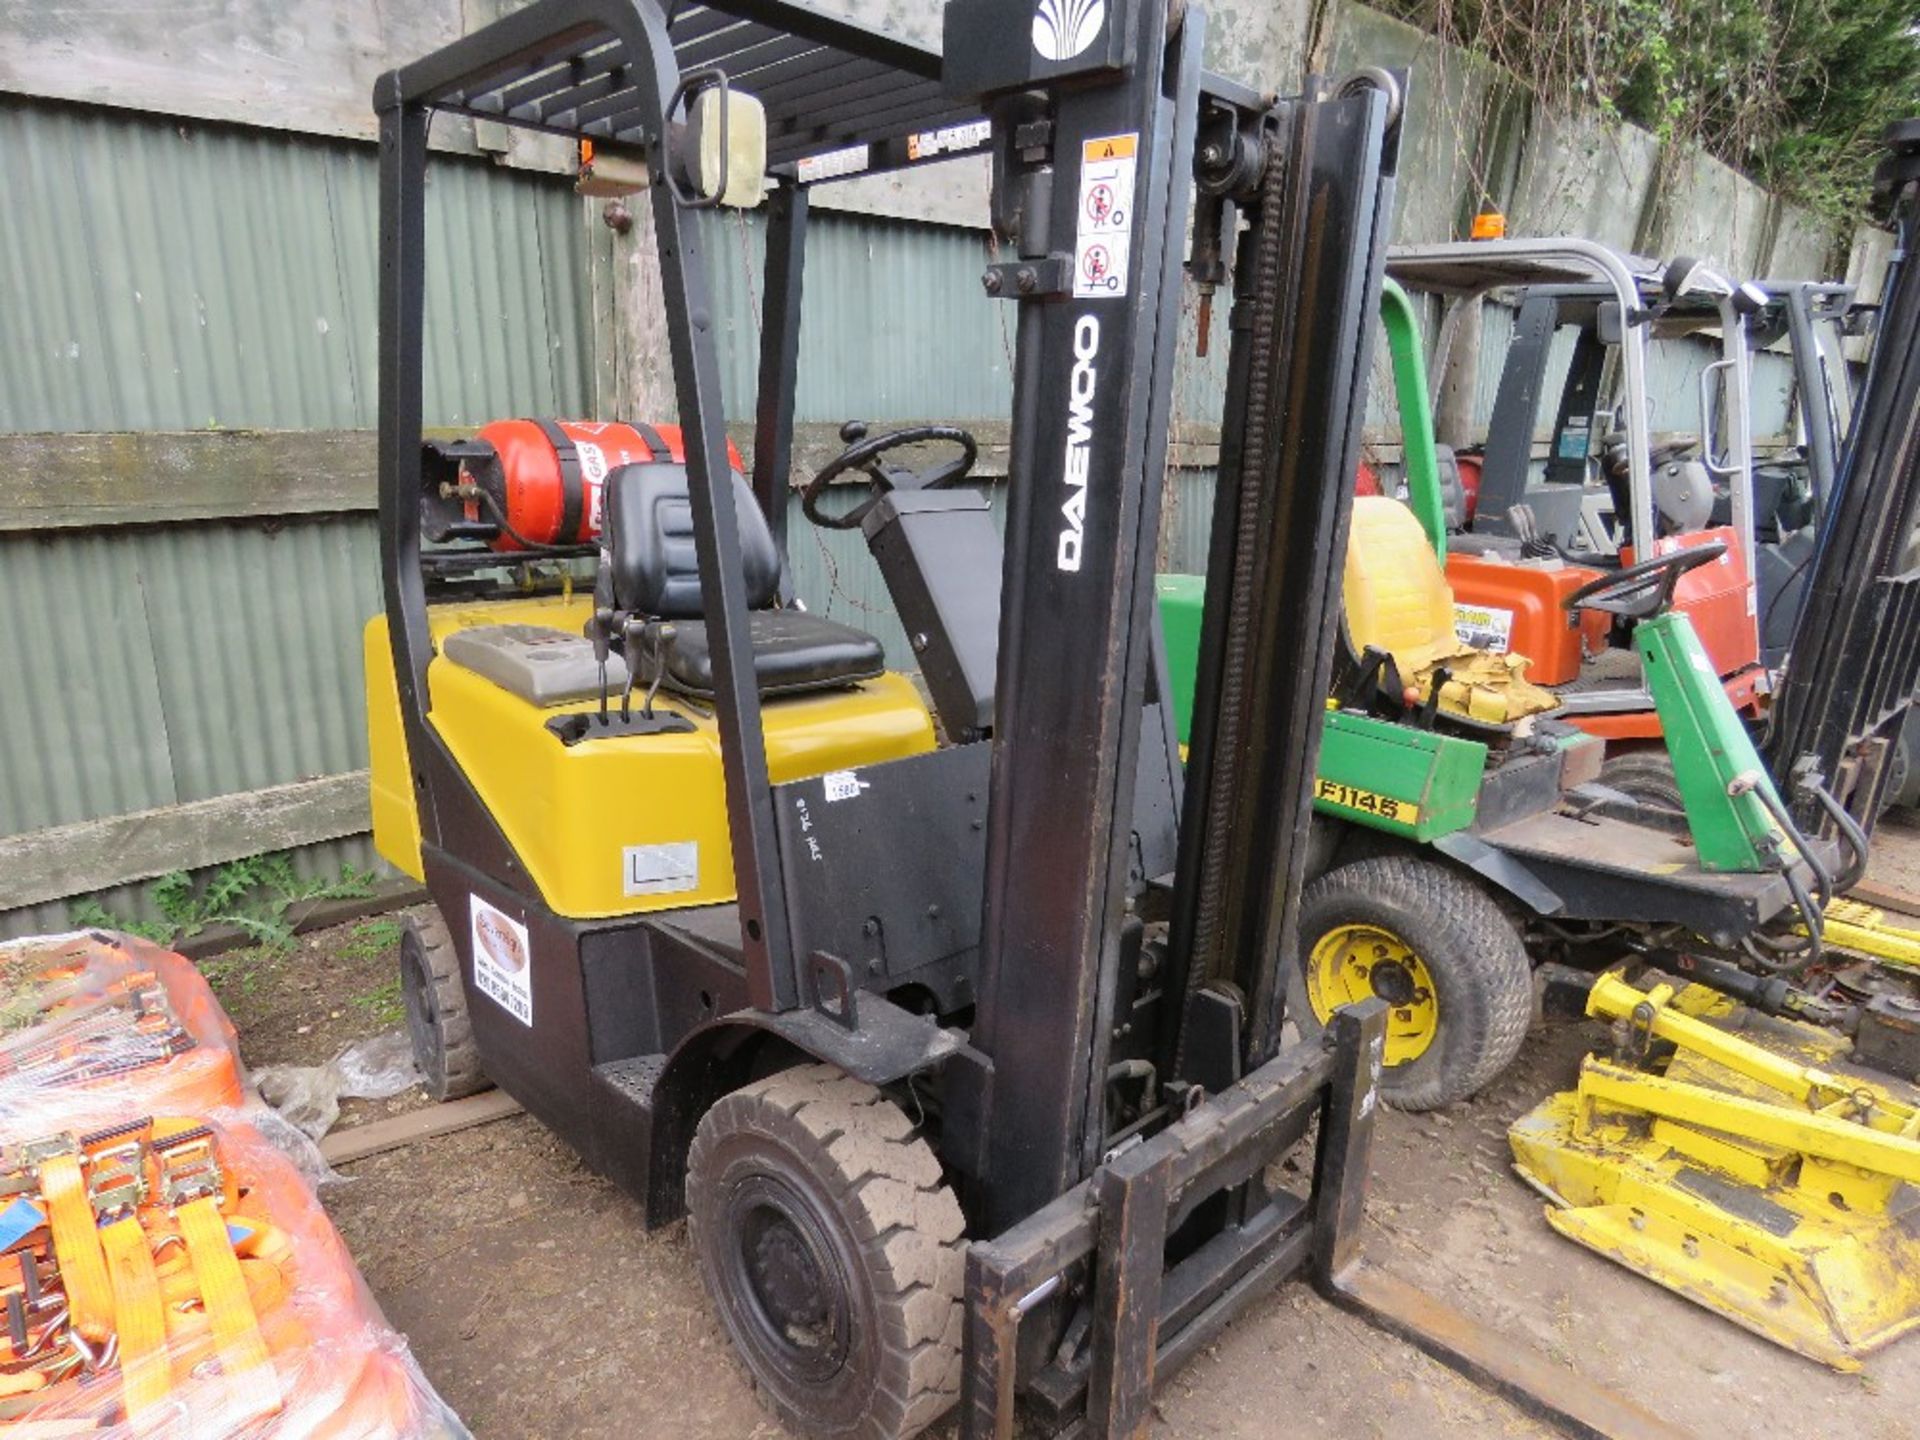 DAEWOO G18S-2 GAS POWERED FORKLIFT TRUCK WITH SIDE SHIFT. 1.8TONNE LIFT CAPACITY. 8136 REC HOURS. YE - Image 2 of 12